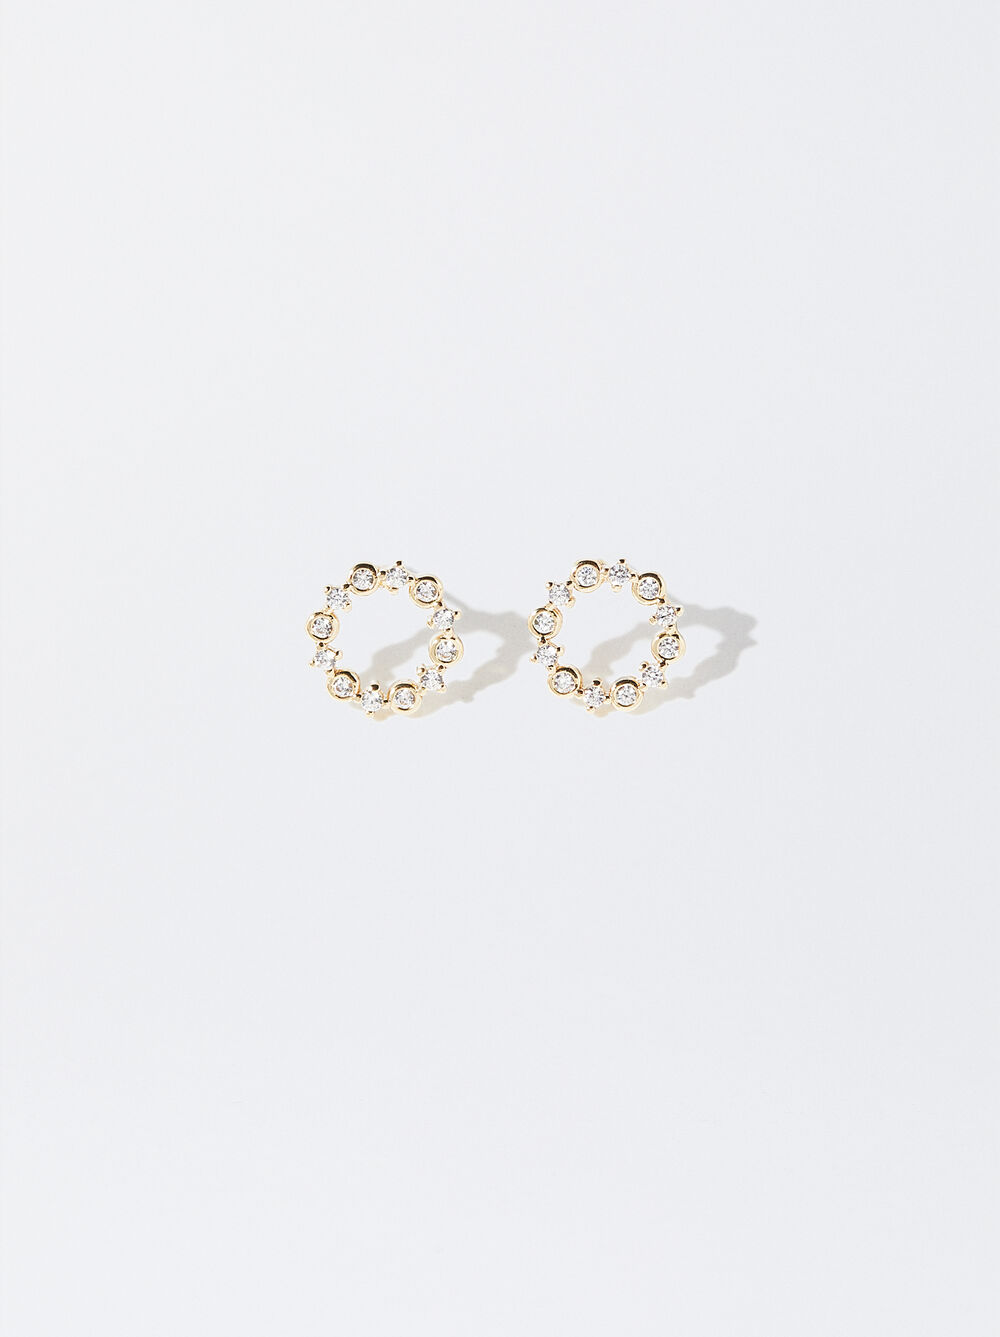 Gold-Toned Earrings With Cubic Zirconia